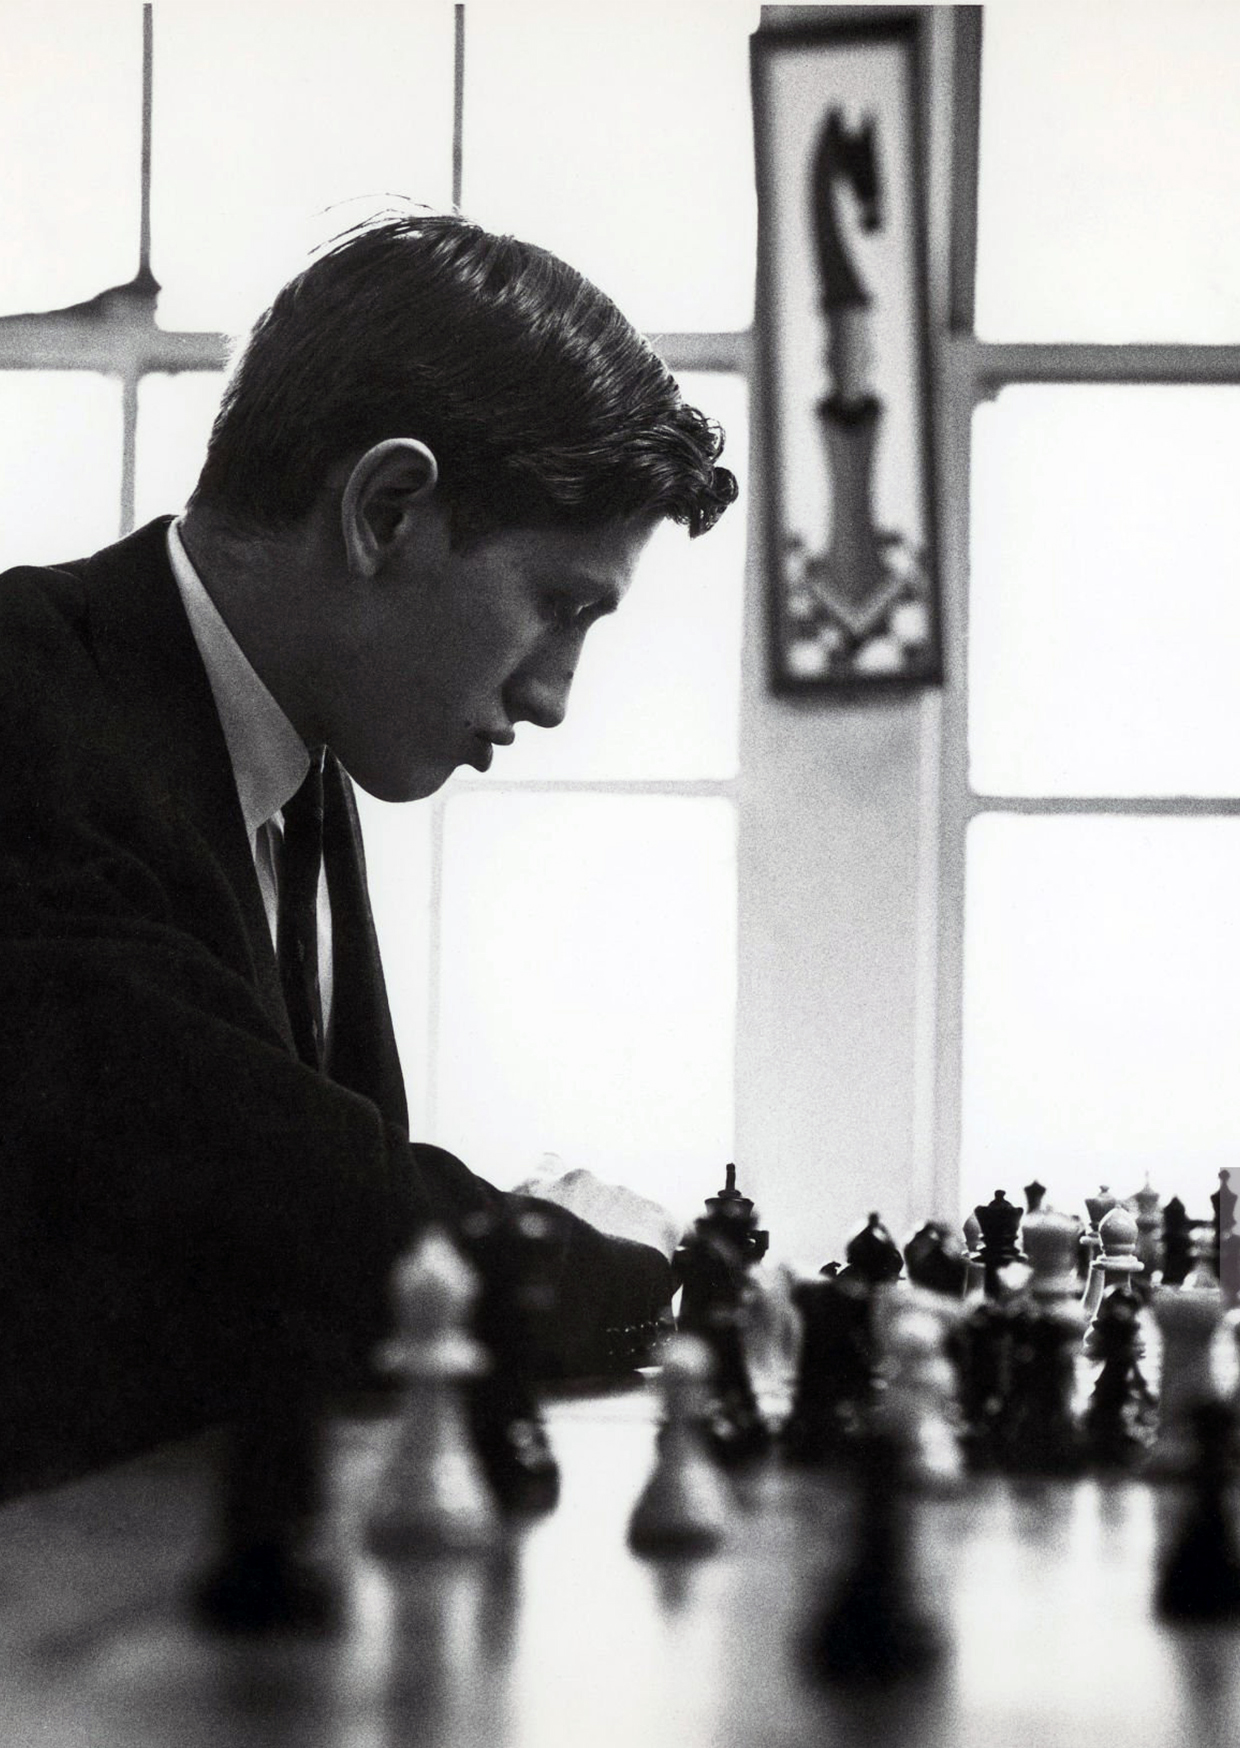 The greatest chess player in the history IQ 180 – Bobby Fischer